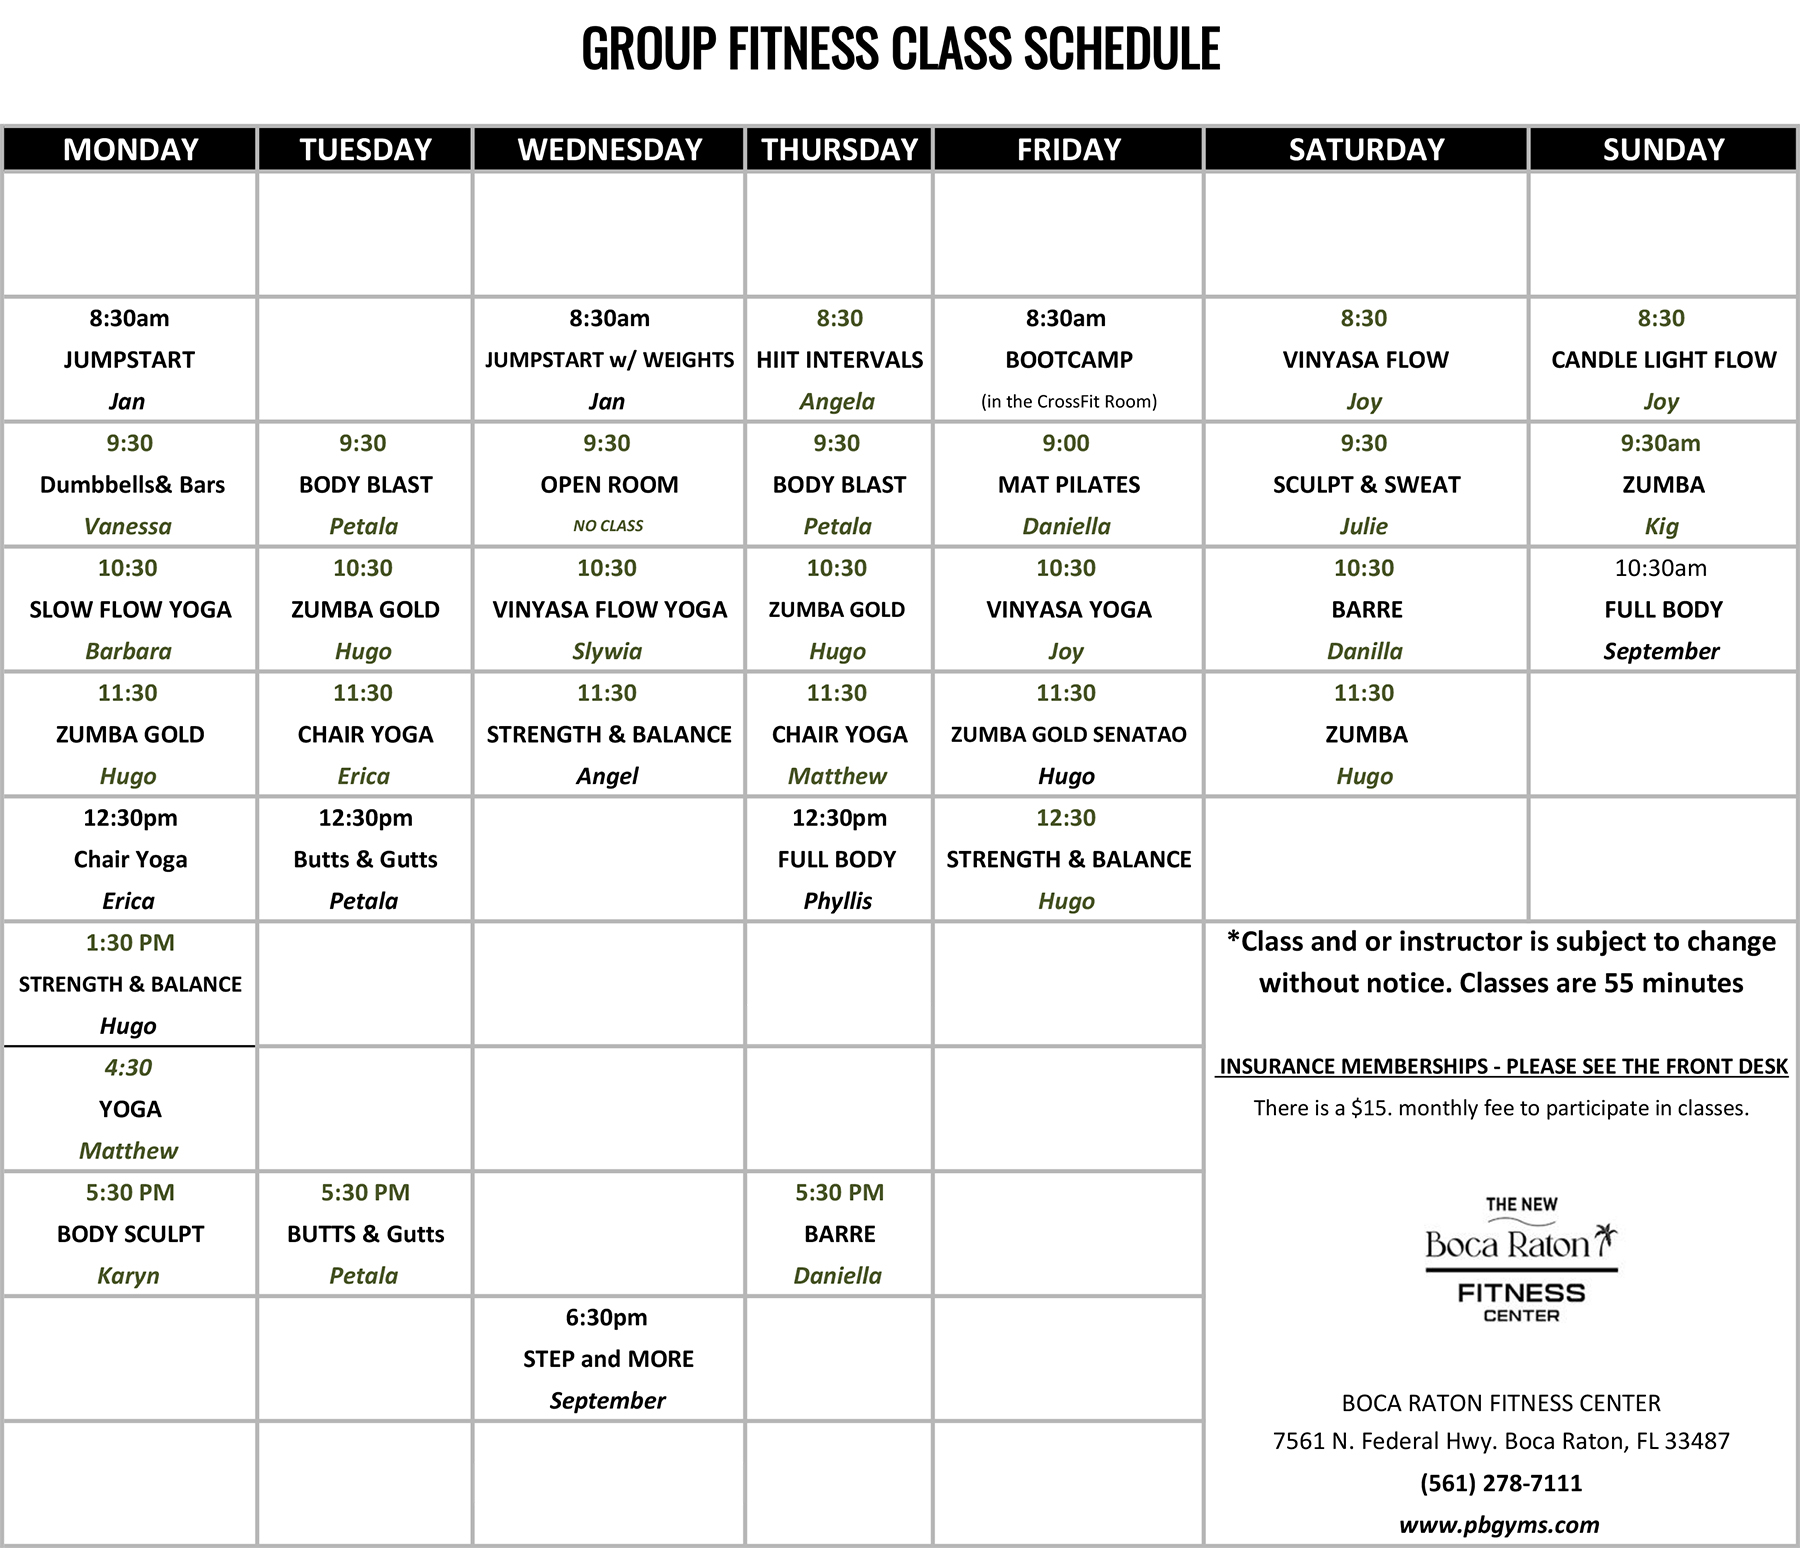 Boca Raton Fitness Center Group Fitness Class Schedule